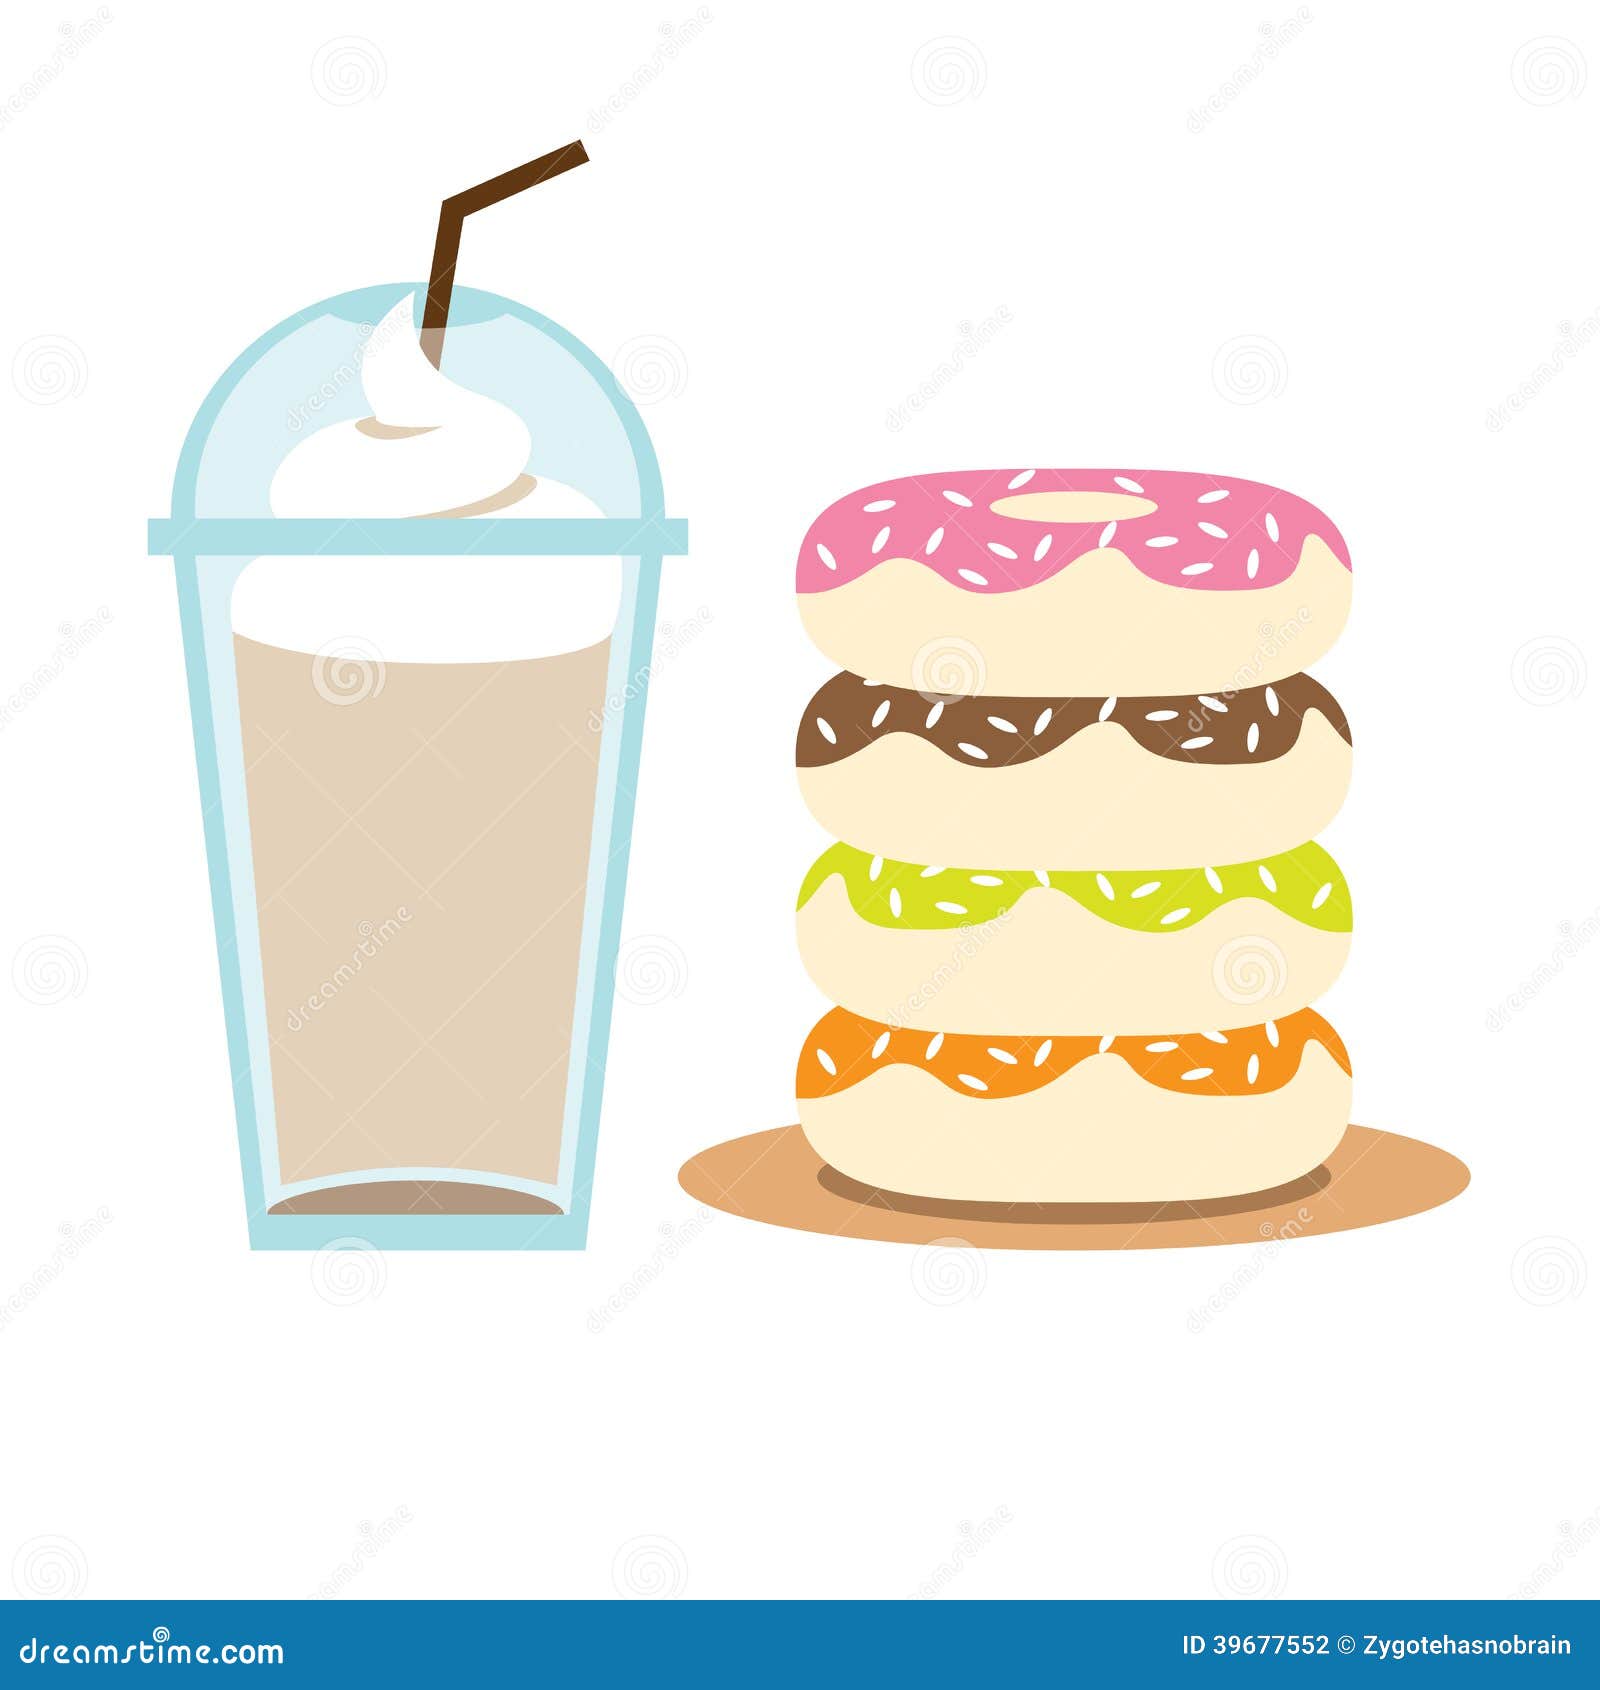 coffee and donuts clipart - photo #26